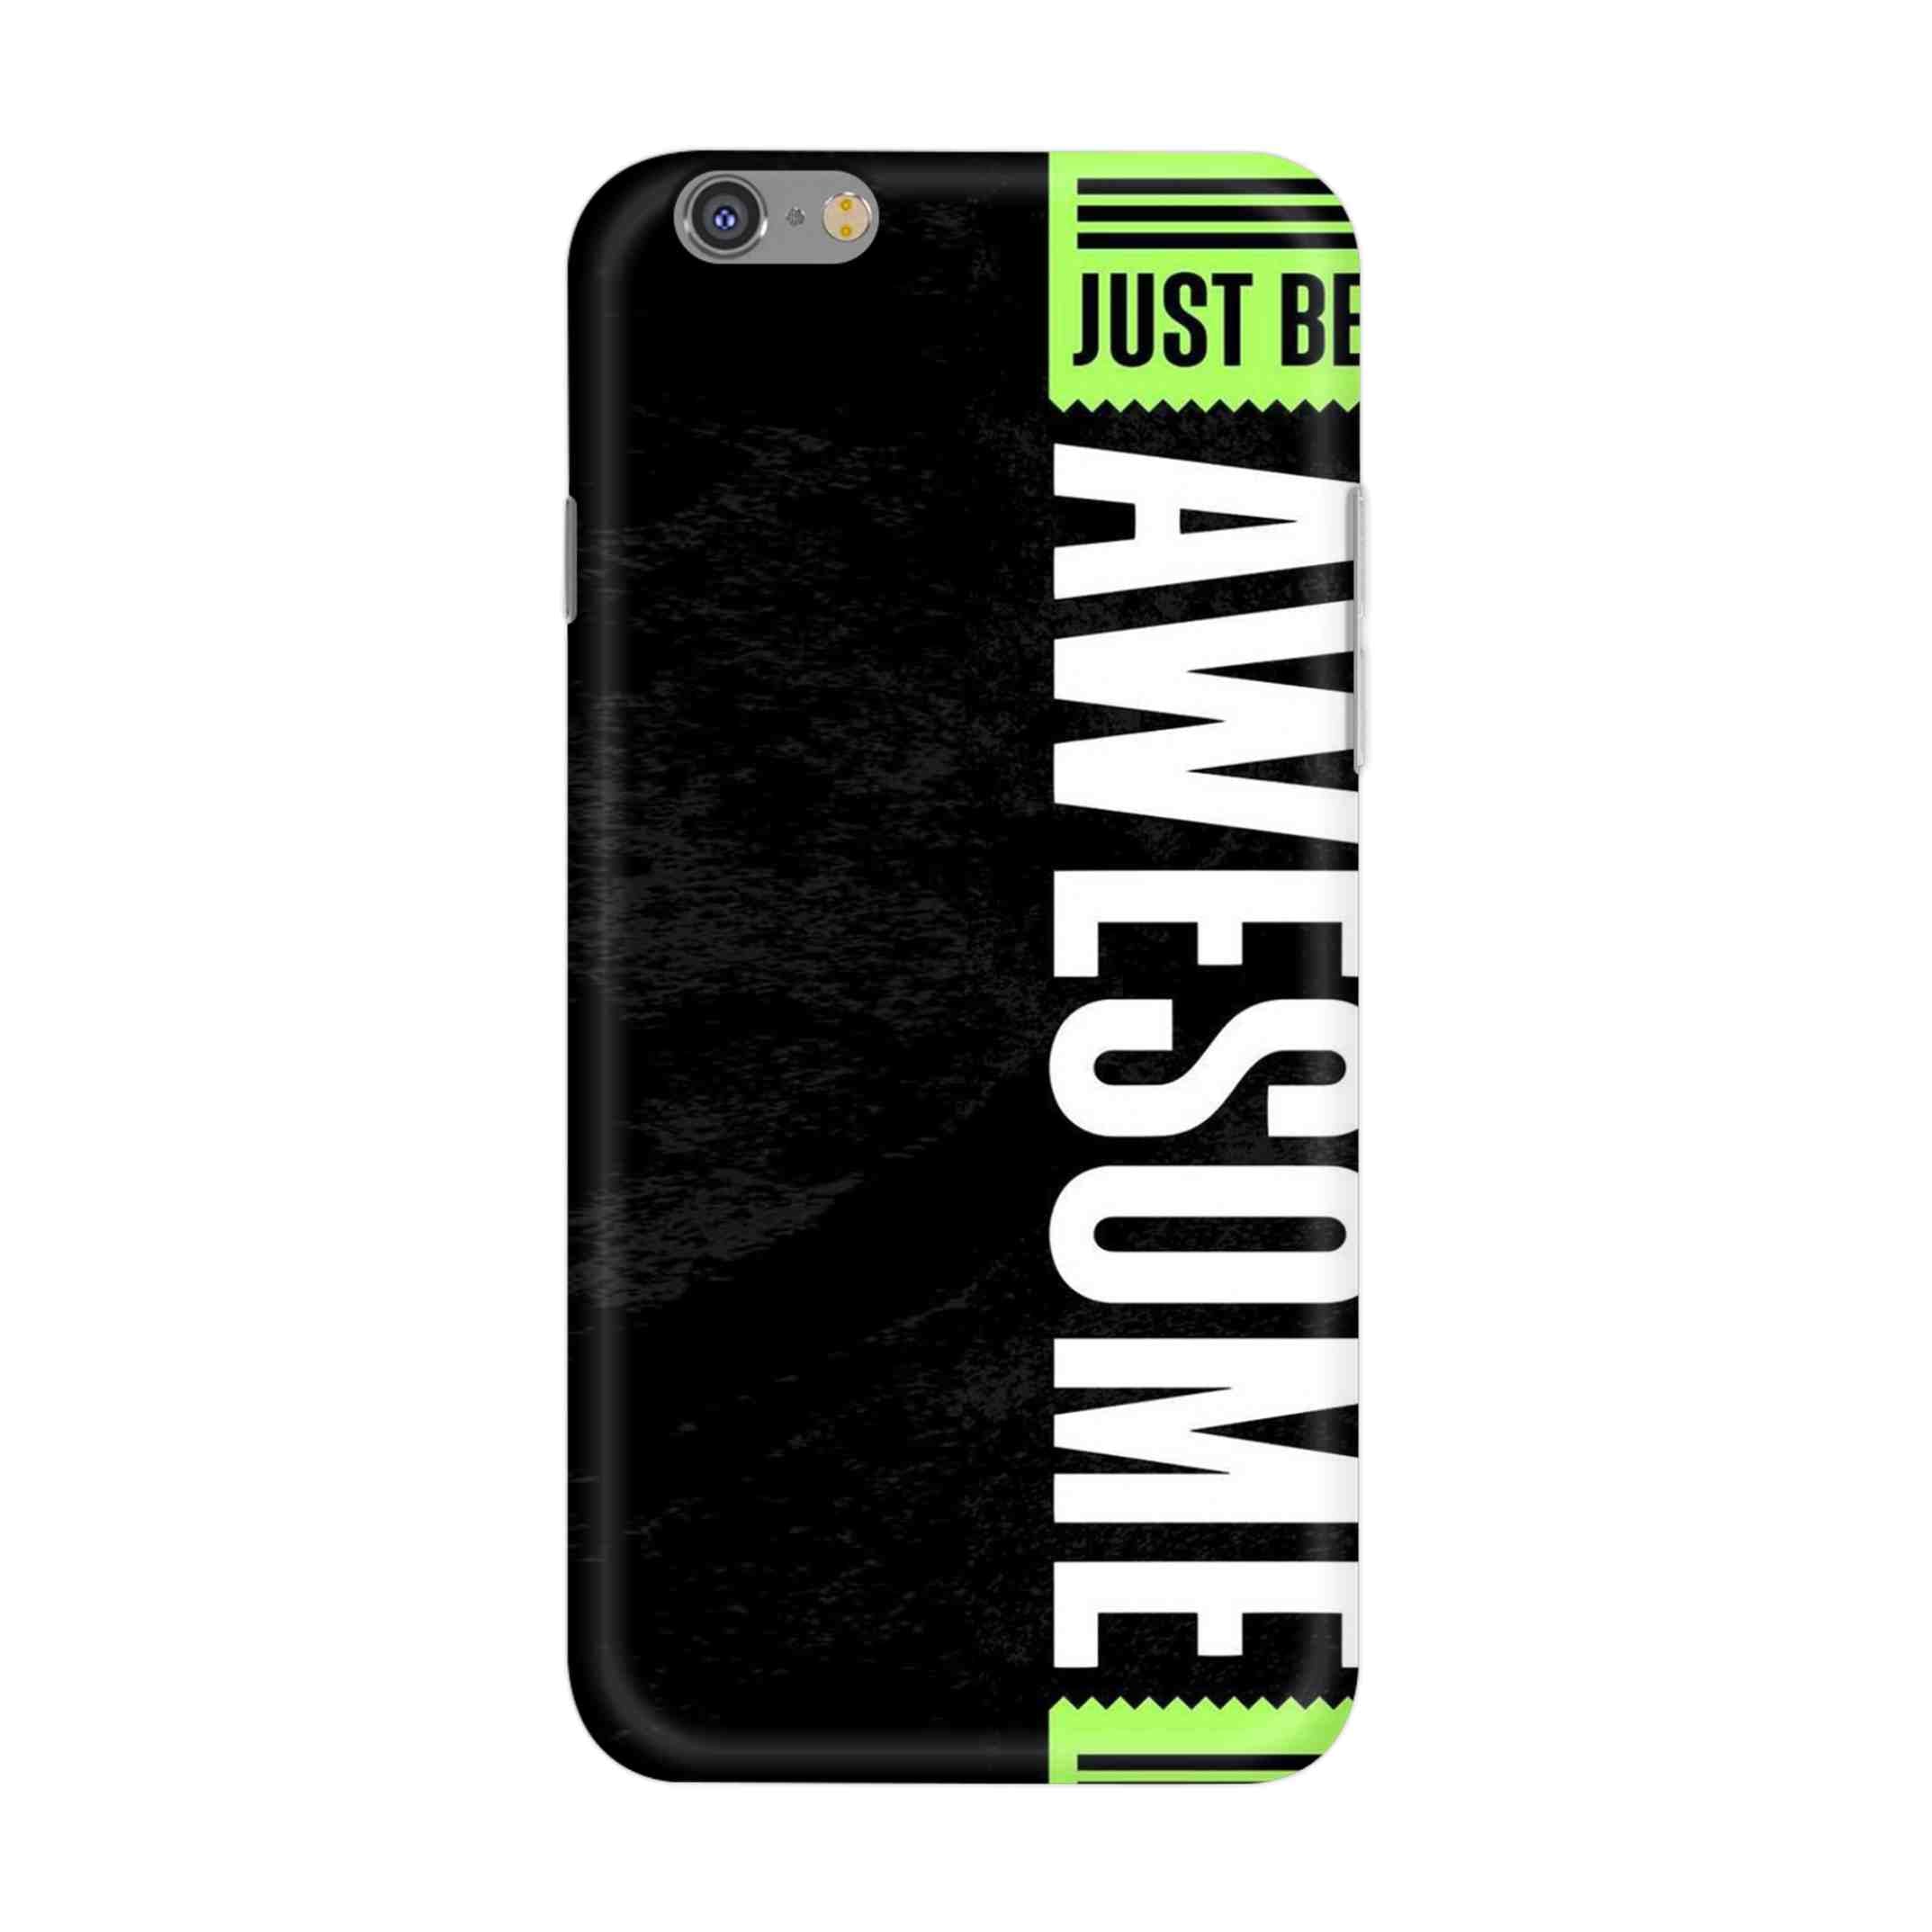 Buy Awesome Street Hard Back Mobile Phone Case/Cover For iPhone 6 Plus / 6s Plus Online